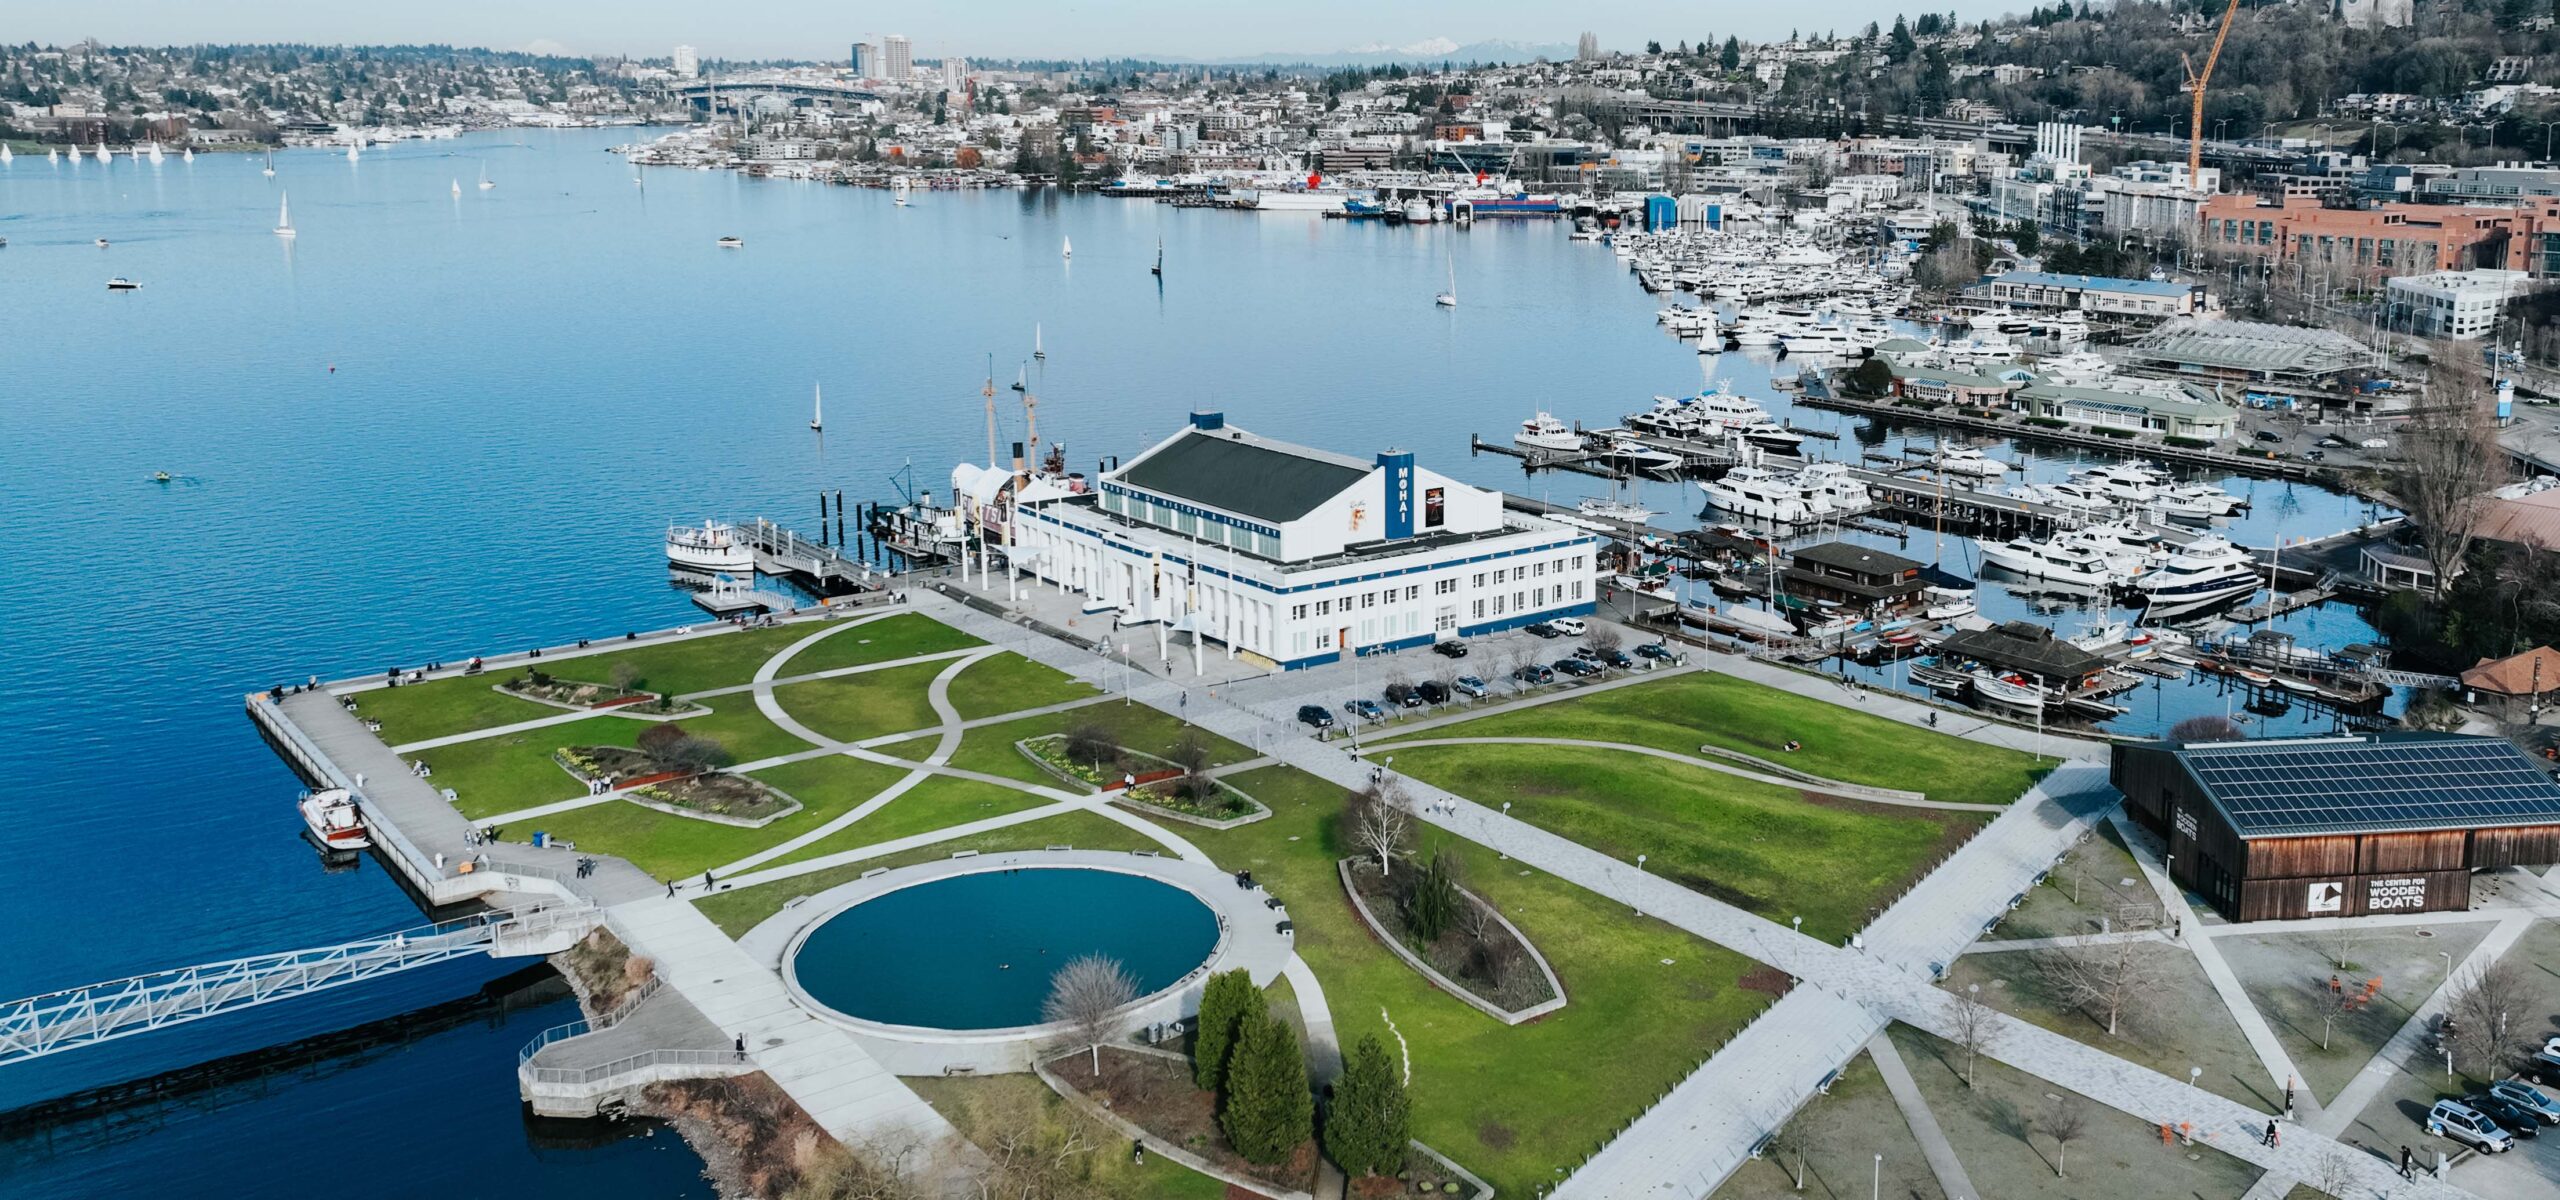 Aerial view of South Lake Union and MOHAI.